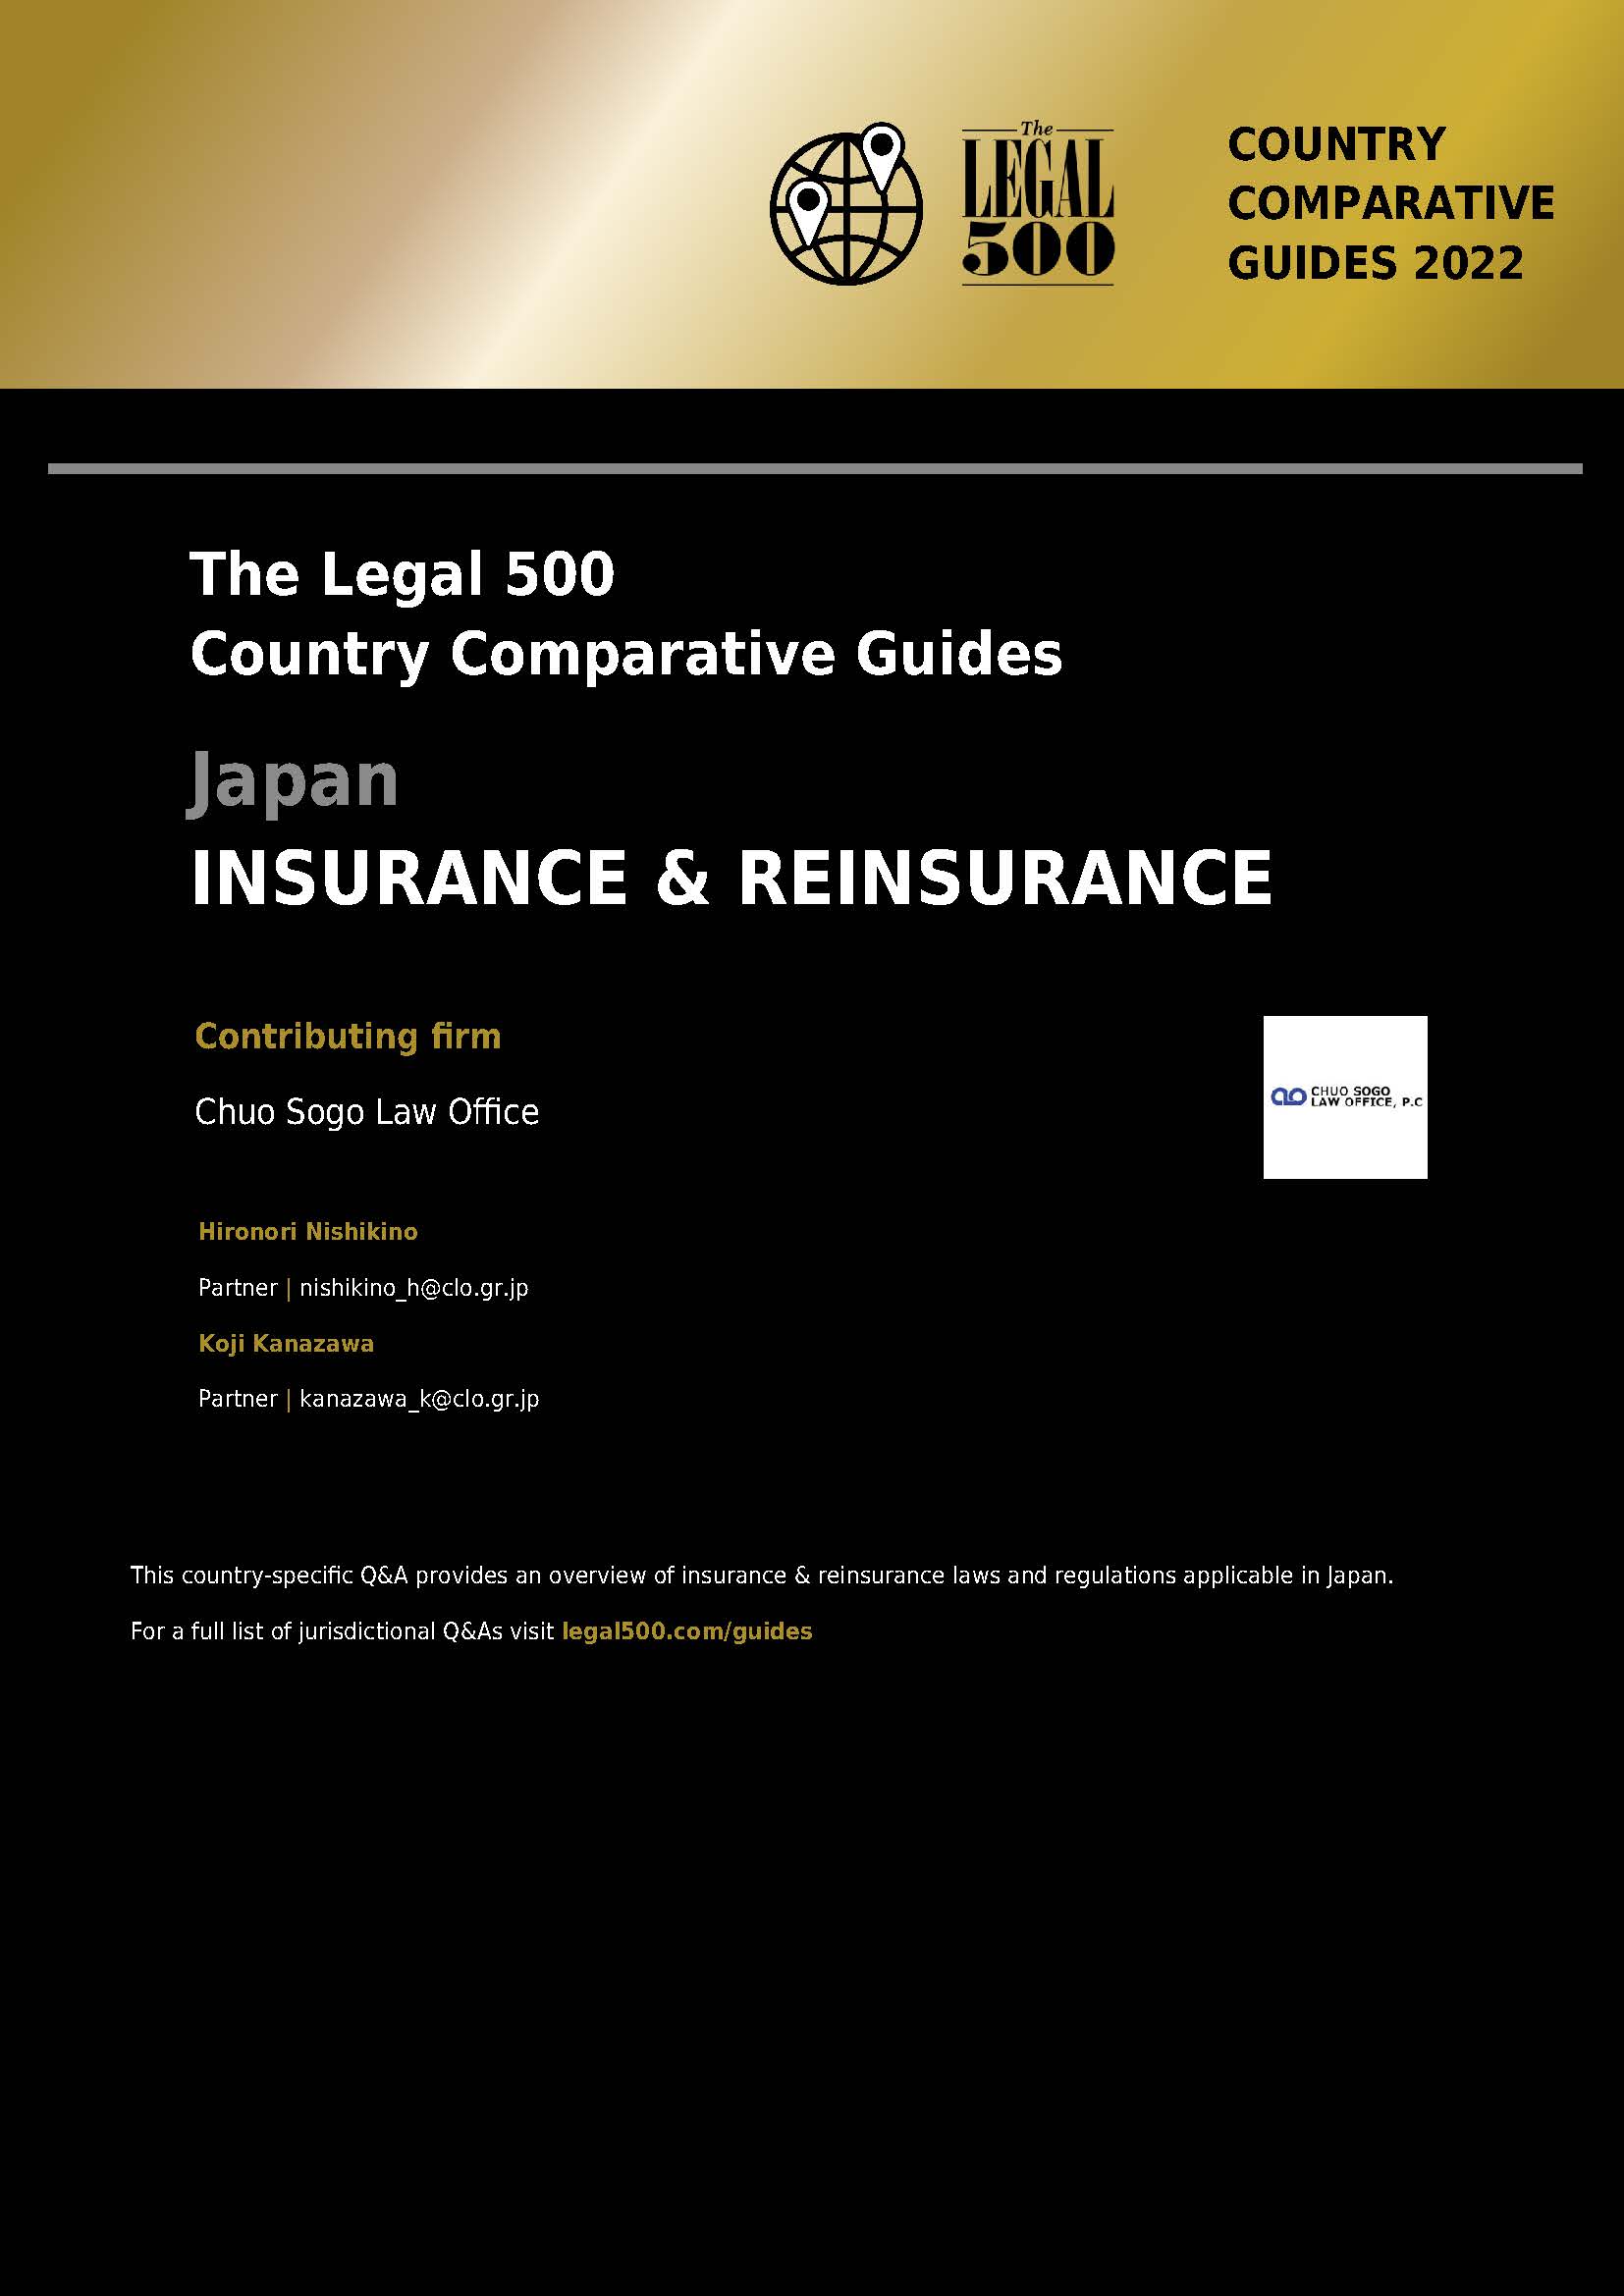 The Legal 500: 6th Edition Insurance & Reinsurance Comparative Guide